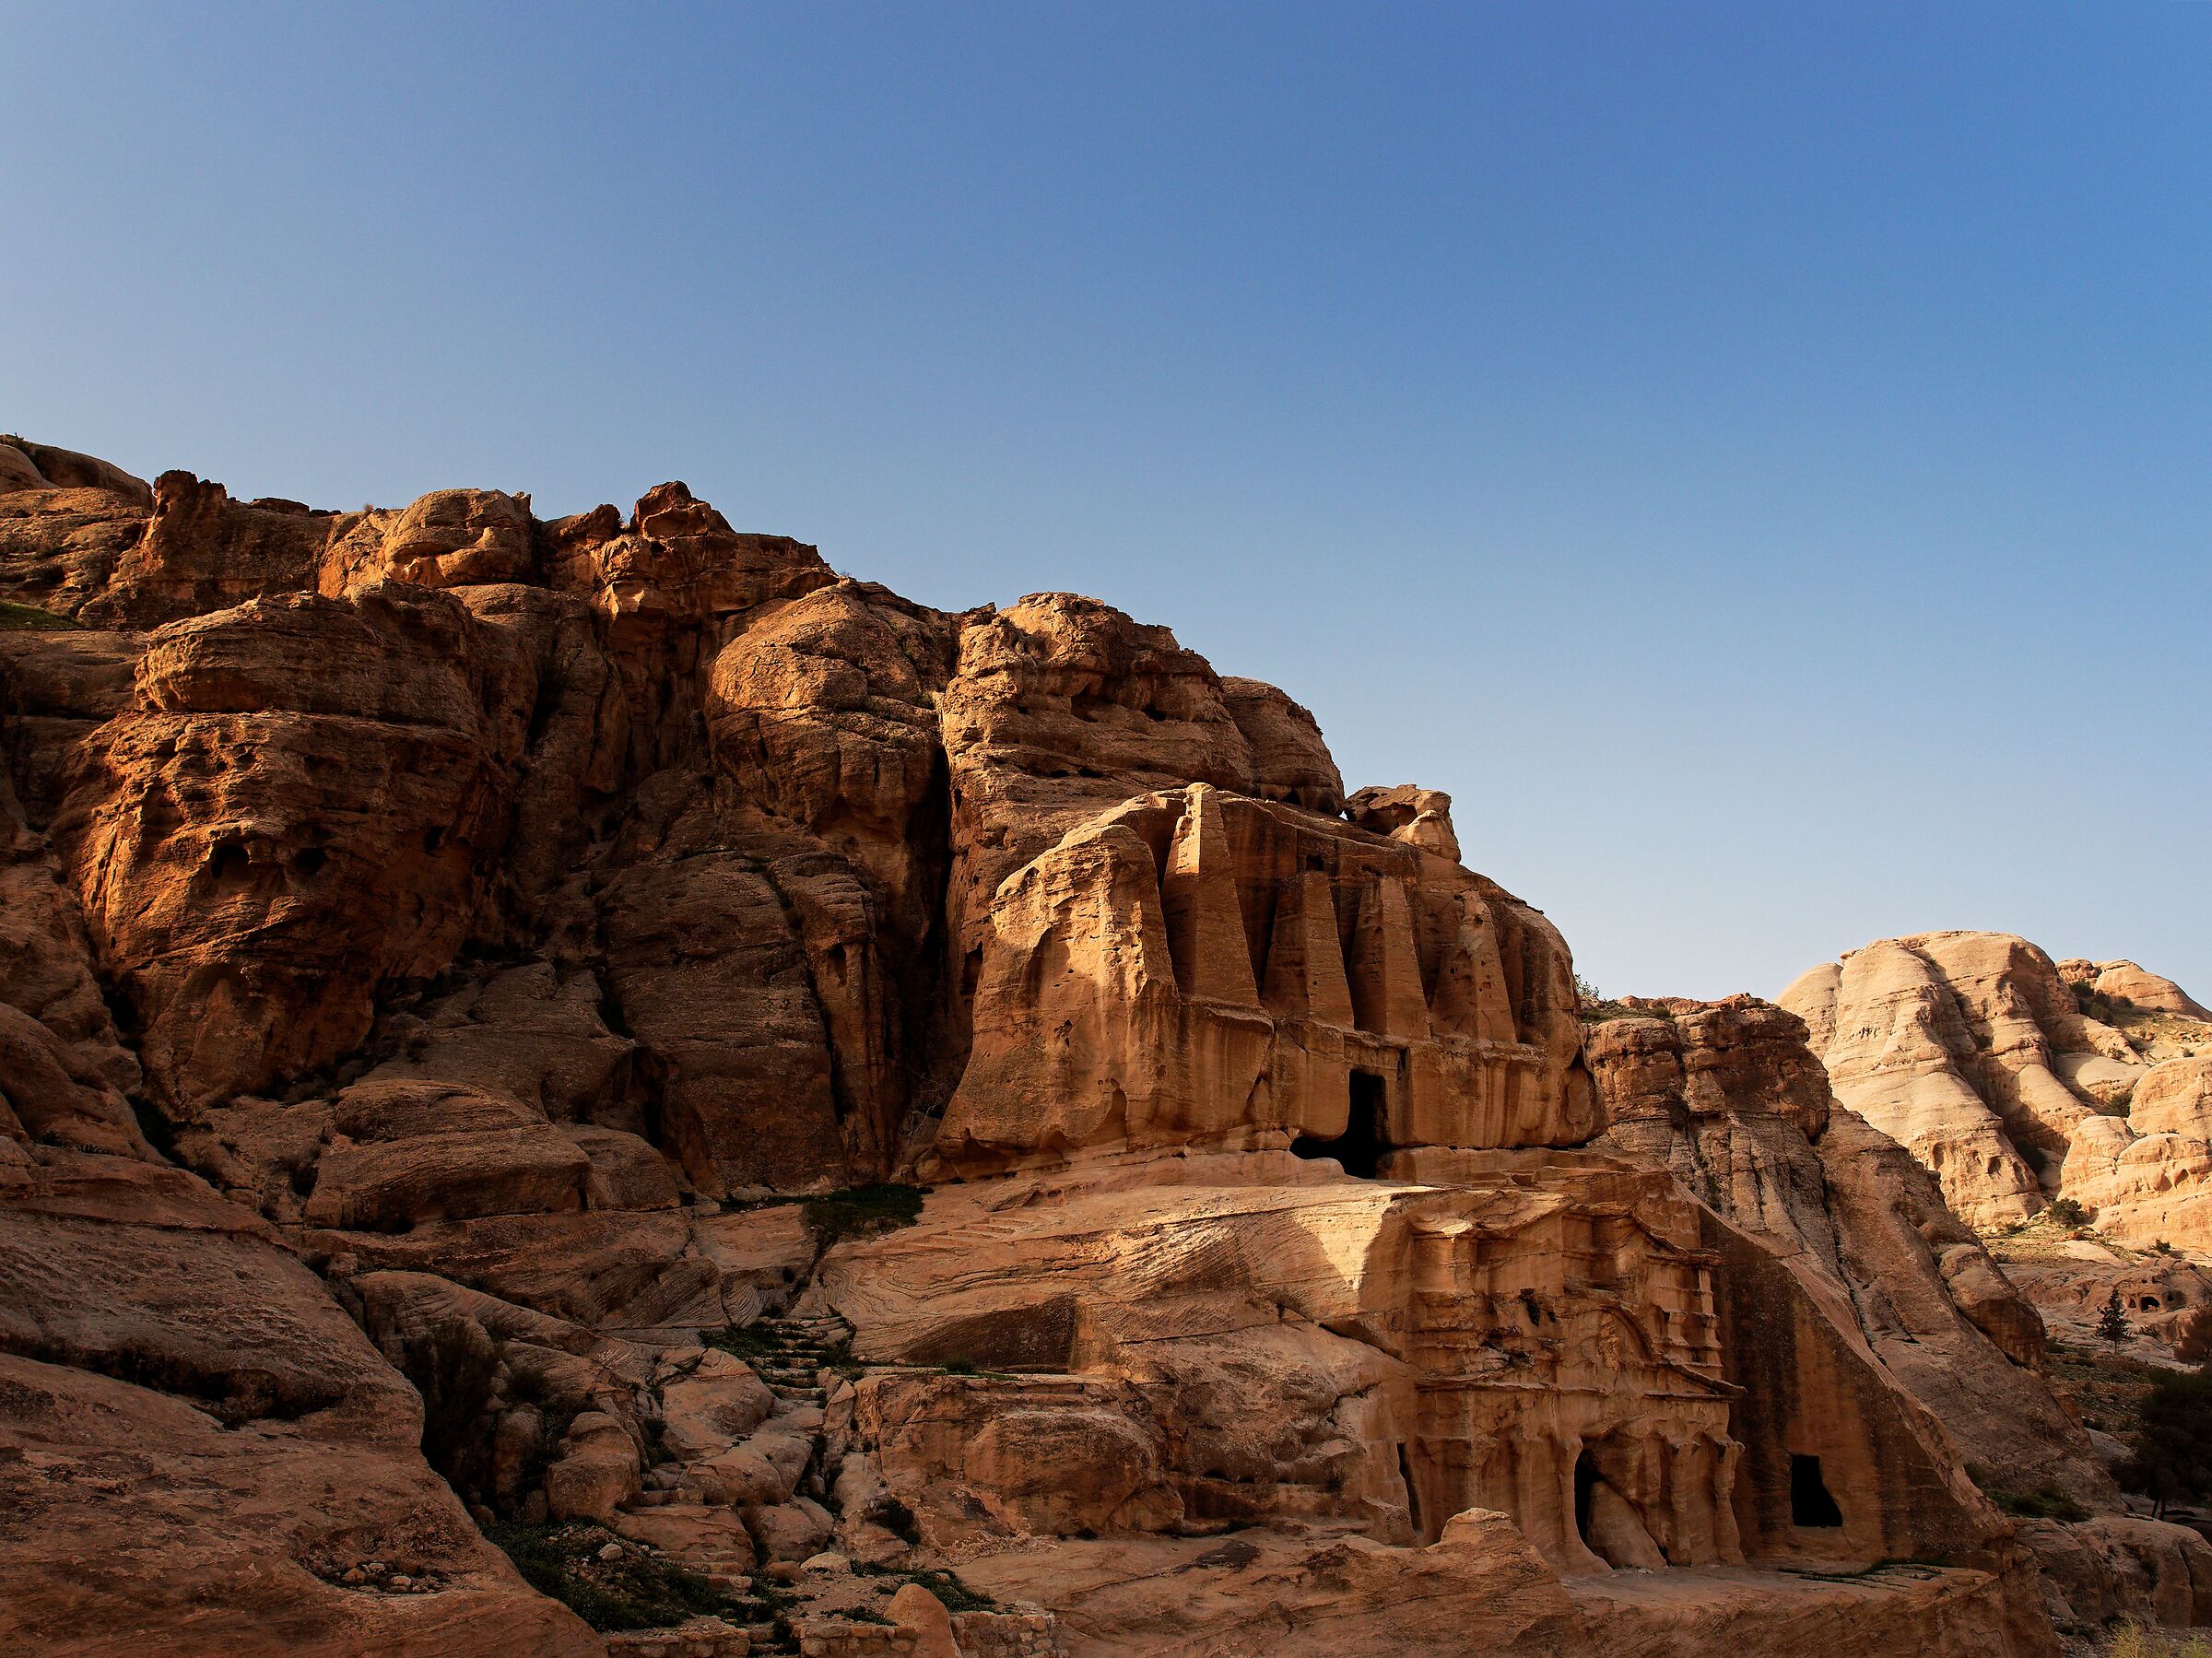 Start a new day in Petra...